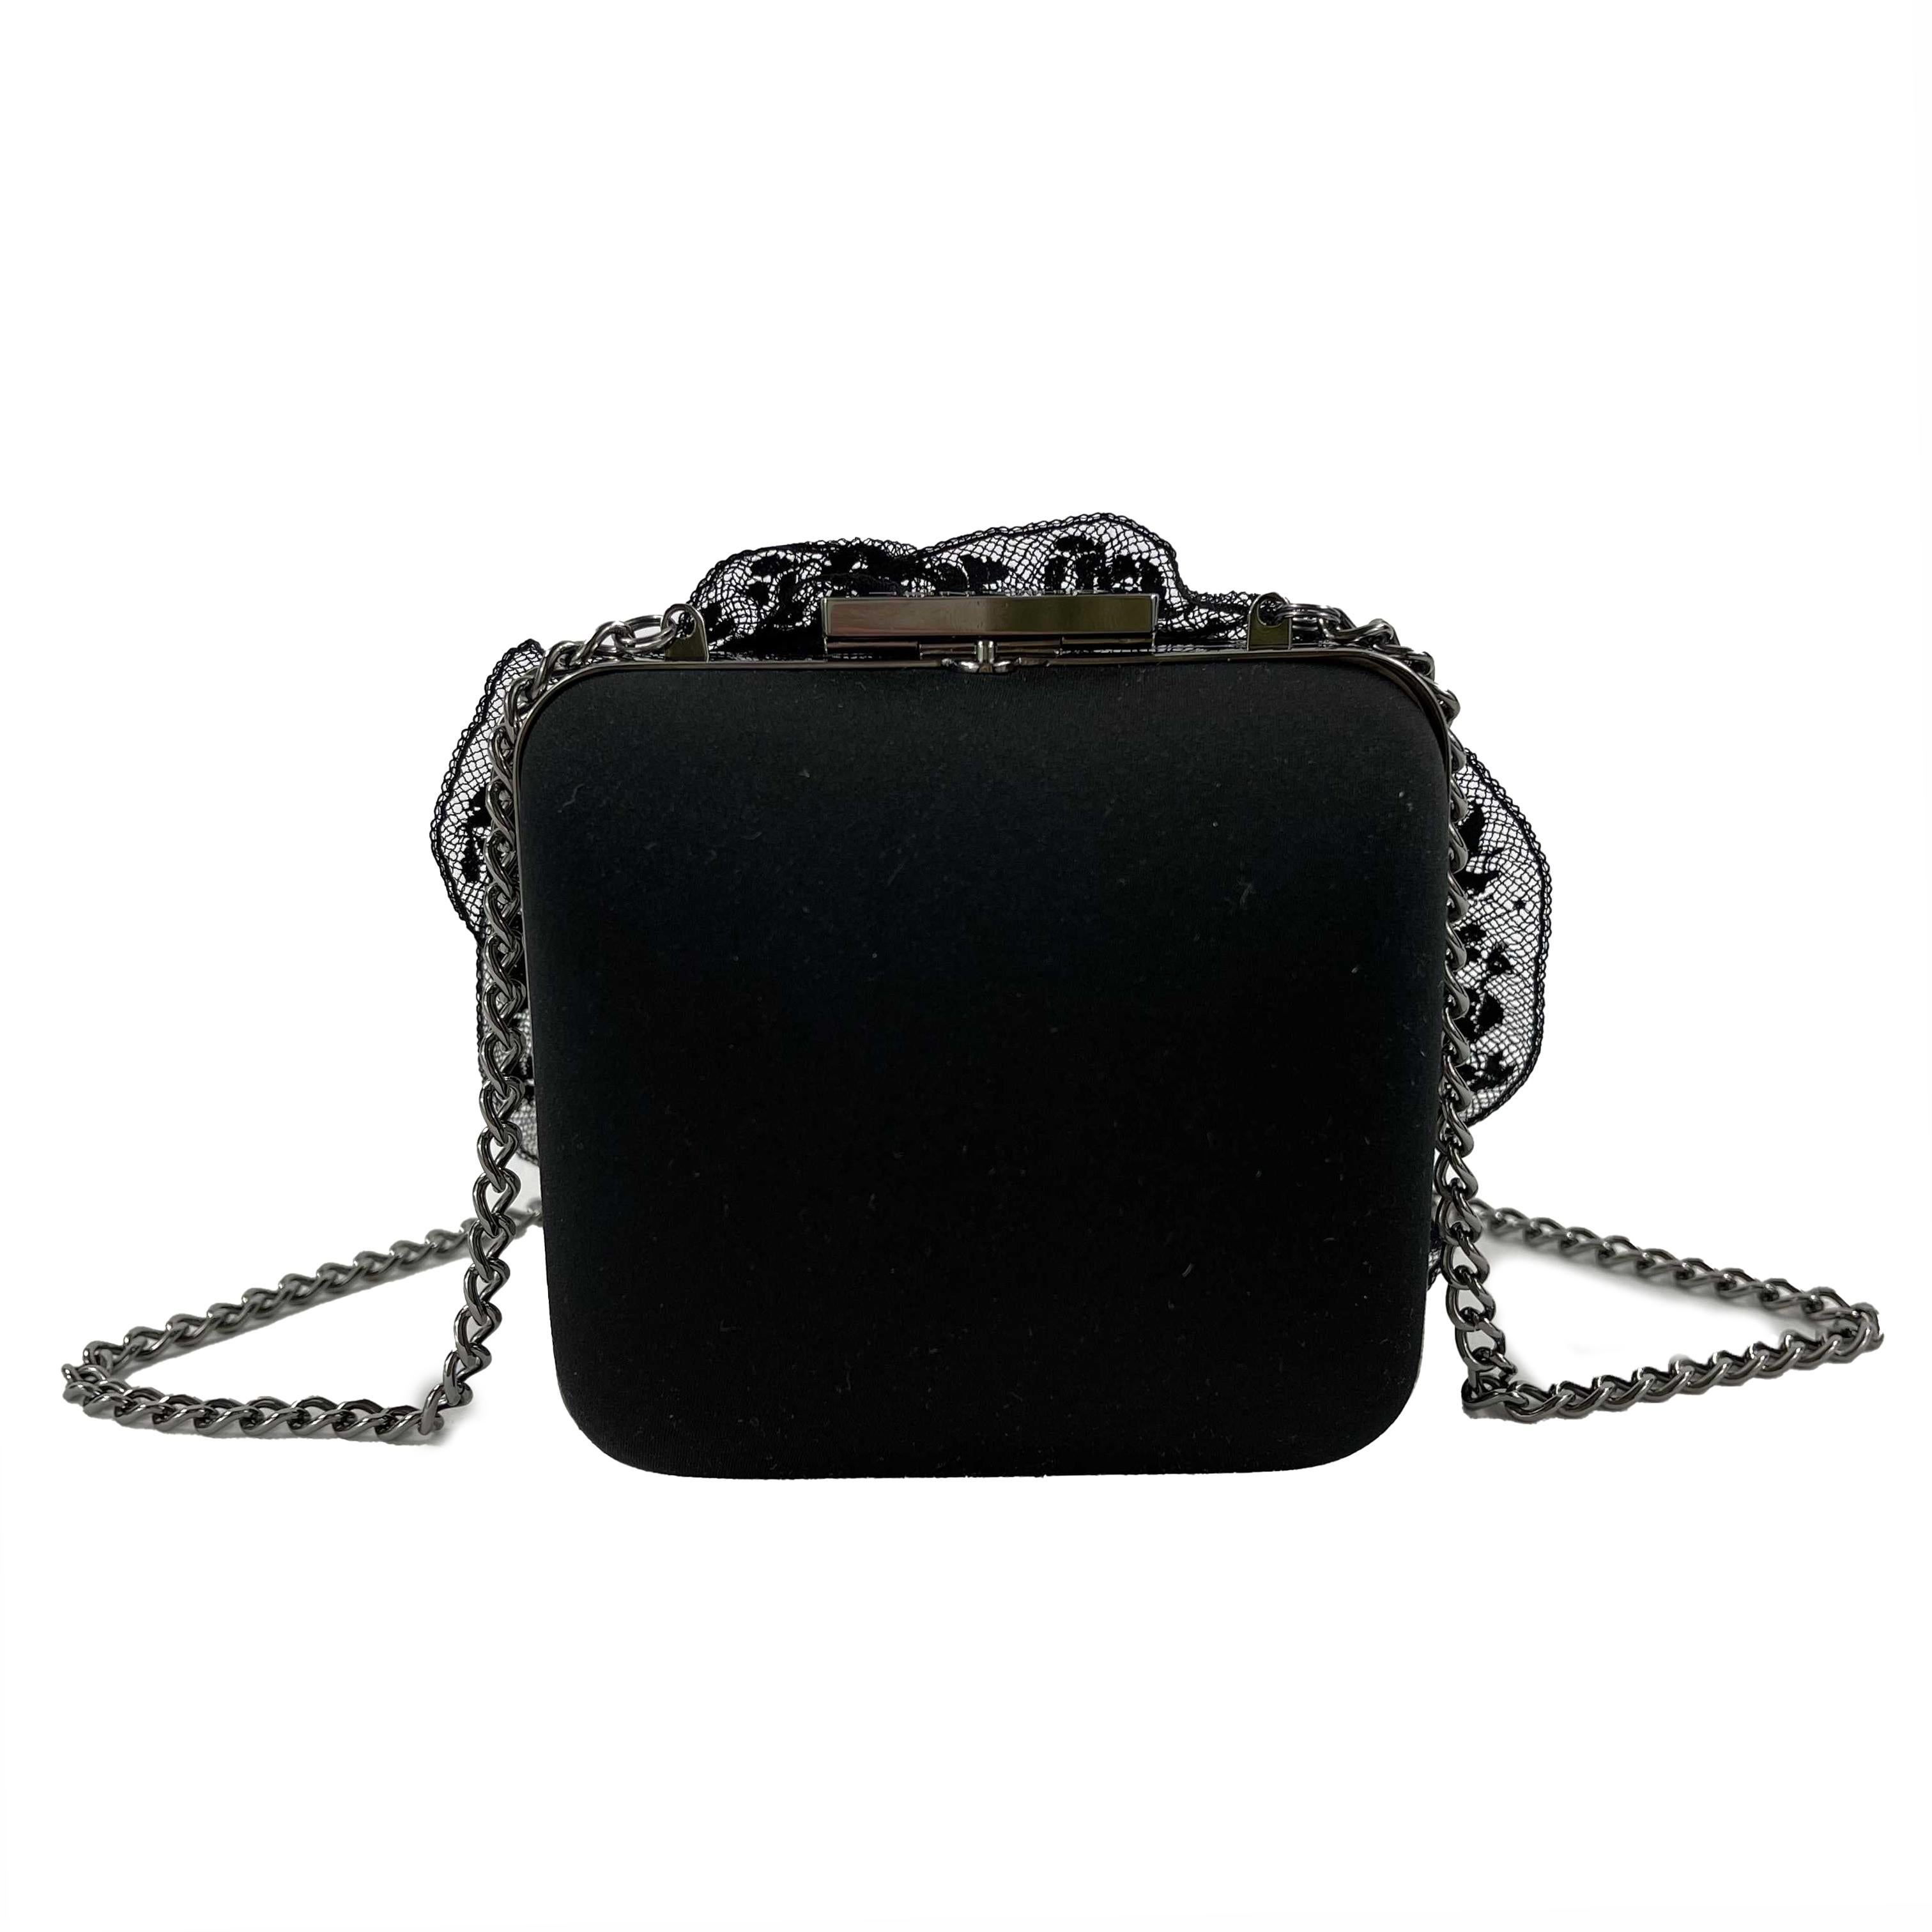 CHANEL - Pristine - 2005 Camellia Crossbody Small Frame - Black, Gun Metal-Toned Hardware - Handbag

Description

From the 2005 collection.
This Chanel crossbody handbag features a Camellia flower composed of lace and satin.
It has a box styled